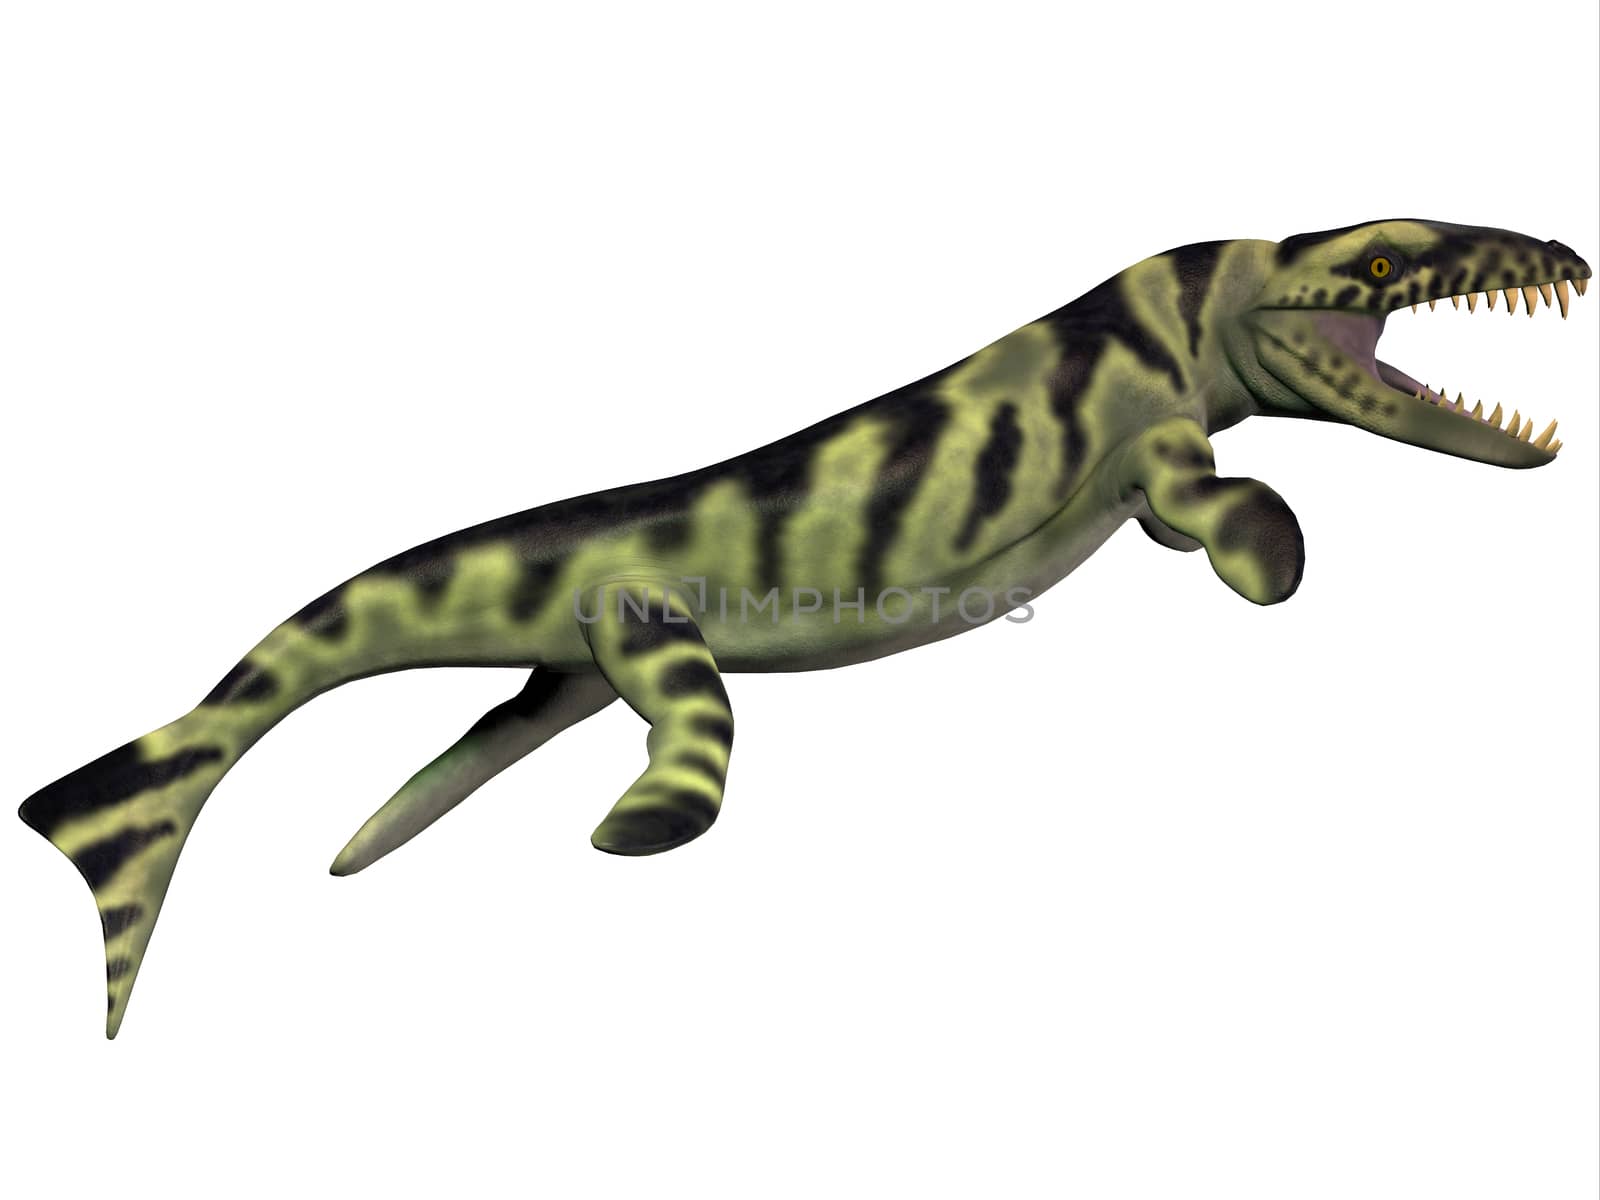 Dakosaurus was discovered in Argentina. It is unique among the family of marine crocodylians with its short snout (which is why it was nicknamed "Godzilla"). It lived during the Late Jurassic - Early Cretaceous.